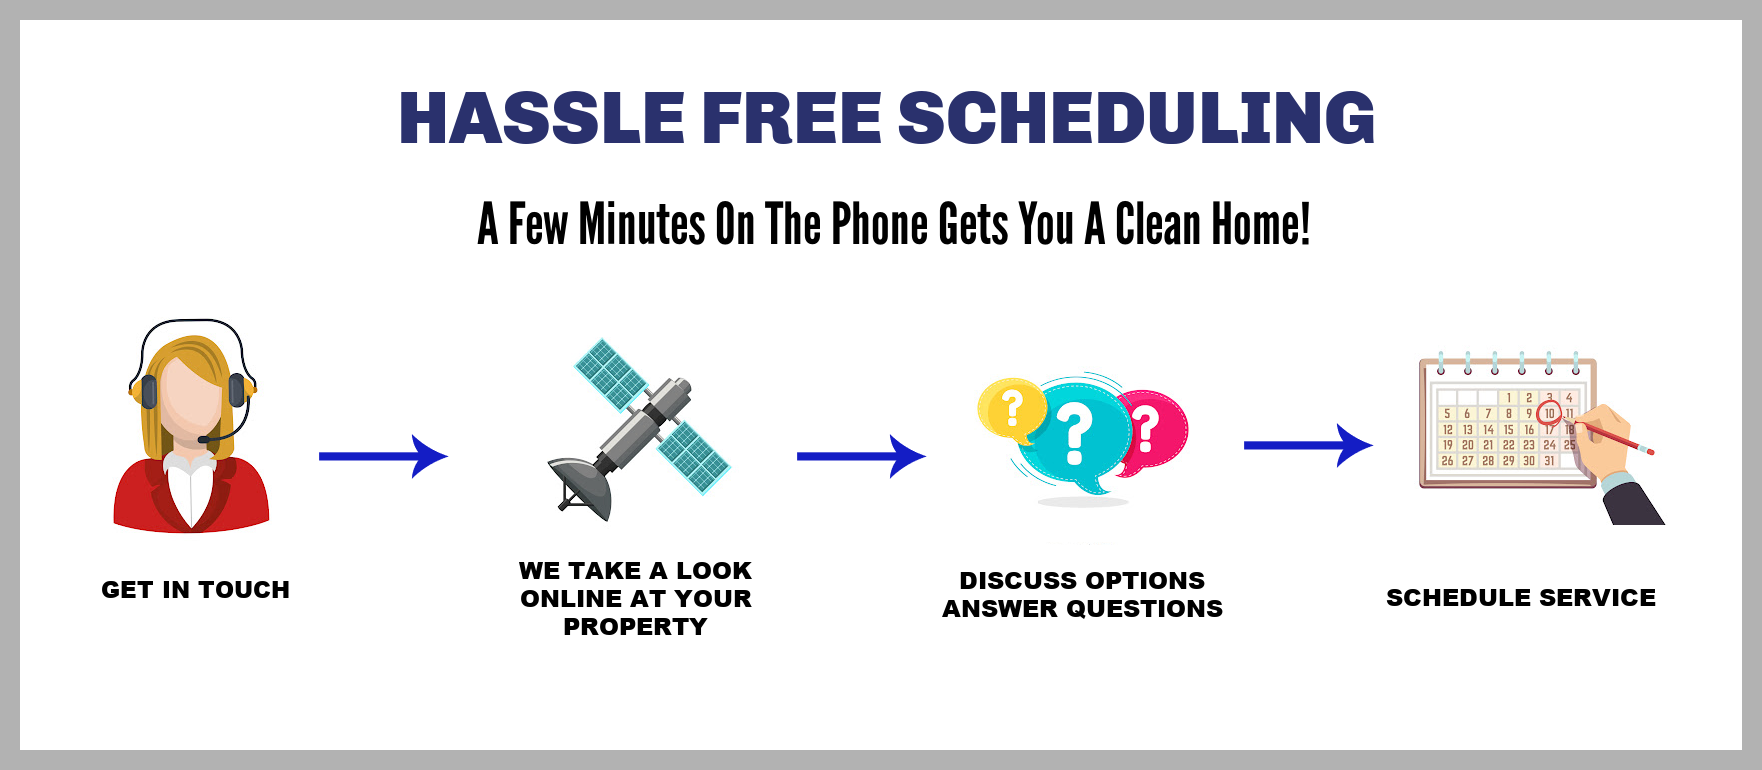 Hassle-free-scheduling-power-washing-fort-mill